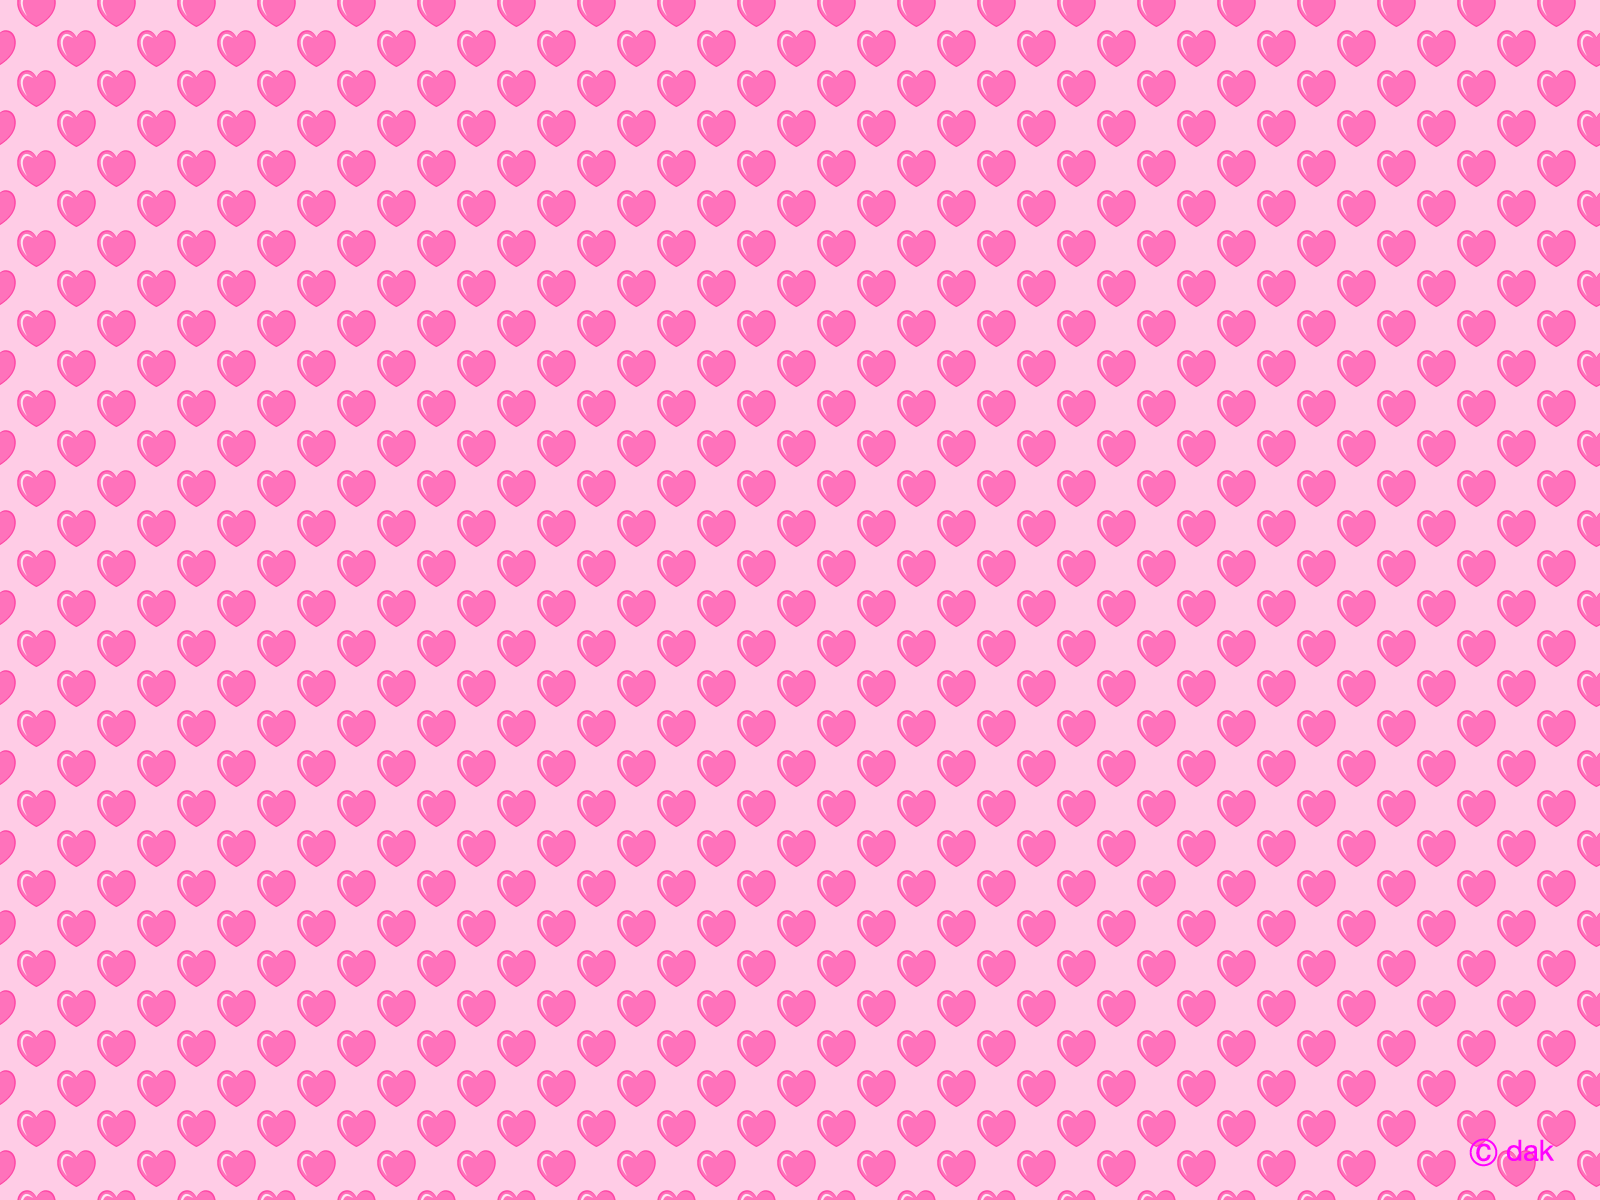 Pink Heart Pattern Backgrounds for Powerpoint Templates - PPT Backgrounds